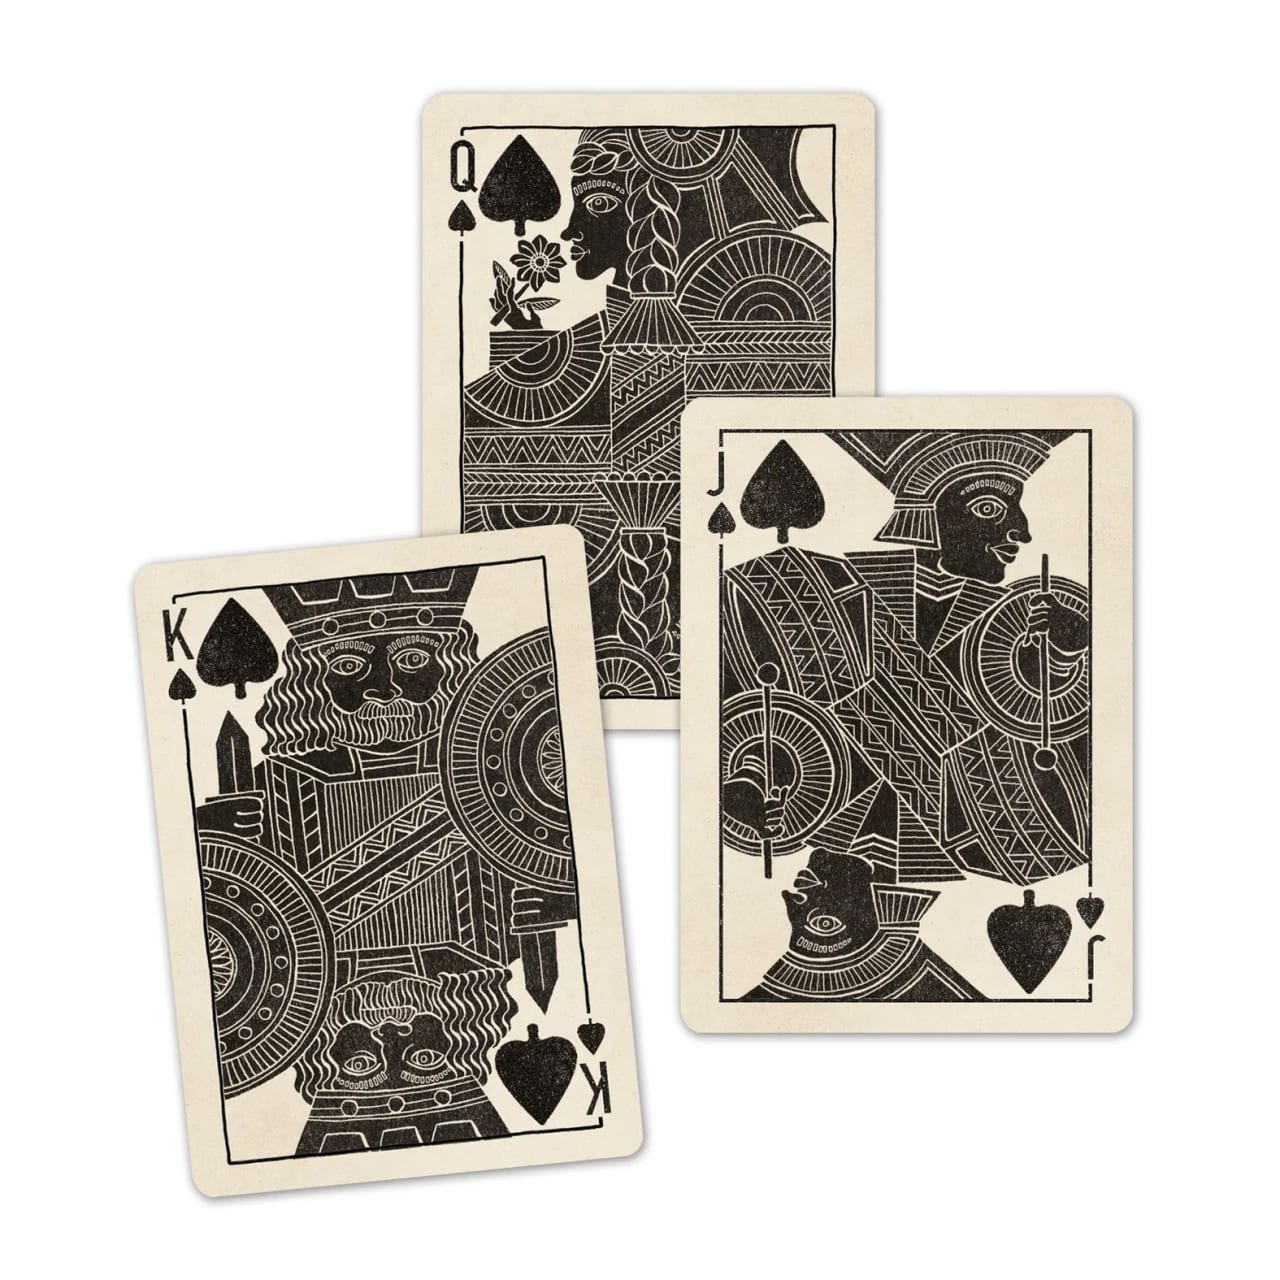  Republic Playing Cards